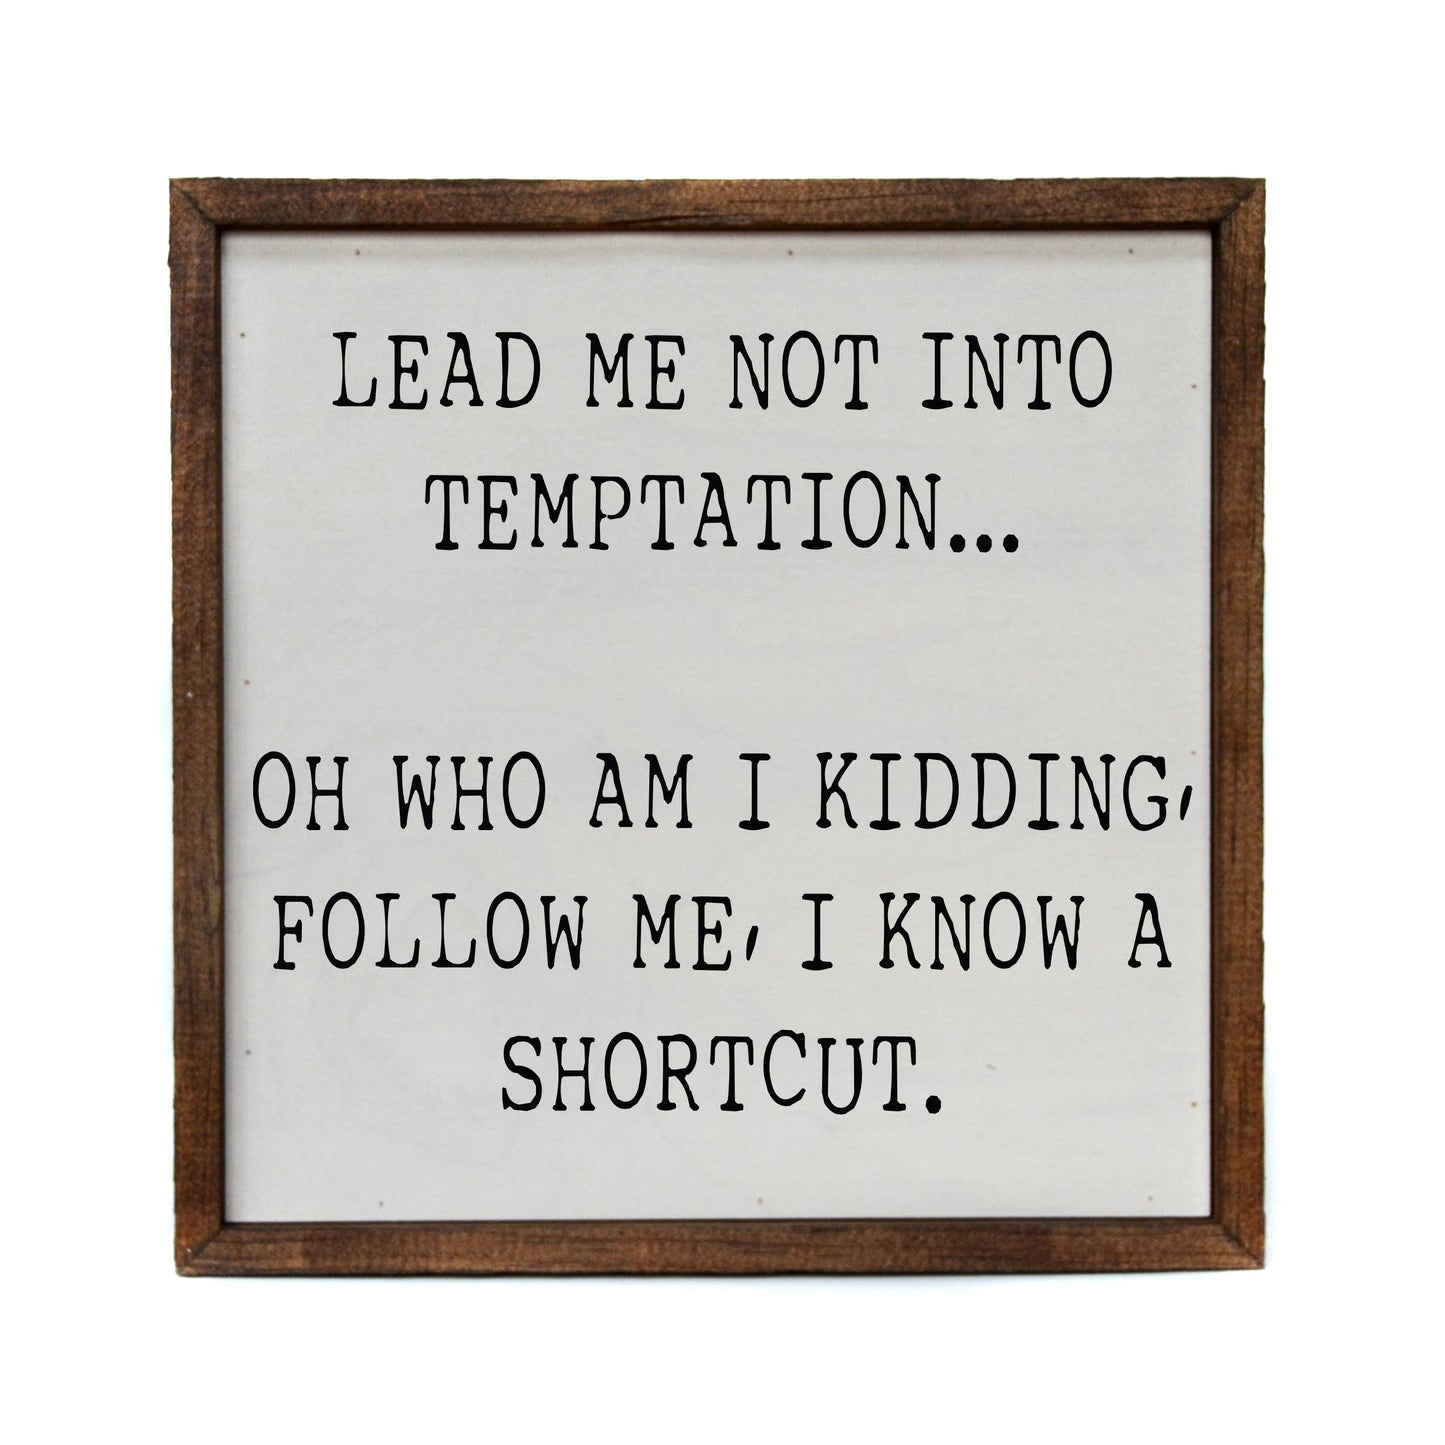 Lead Me Not Into Temptation 10x10 Sign